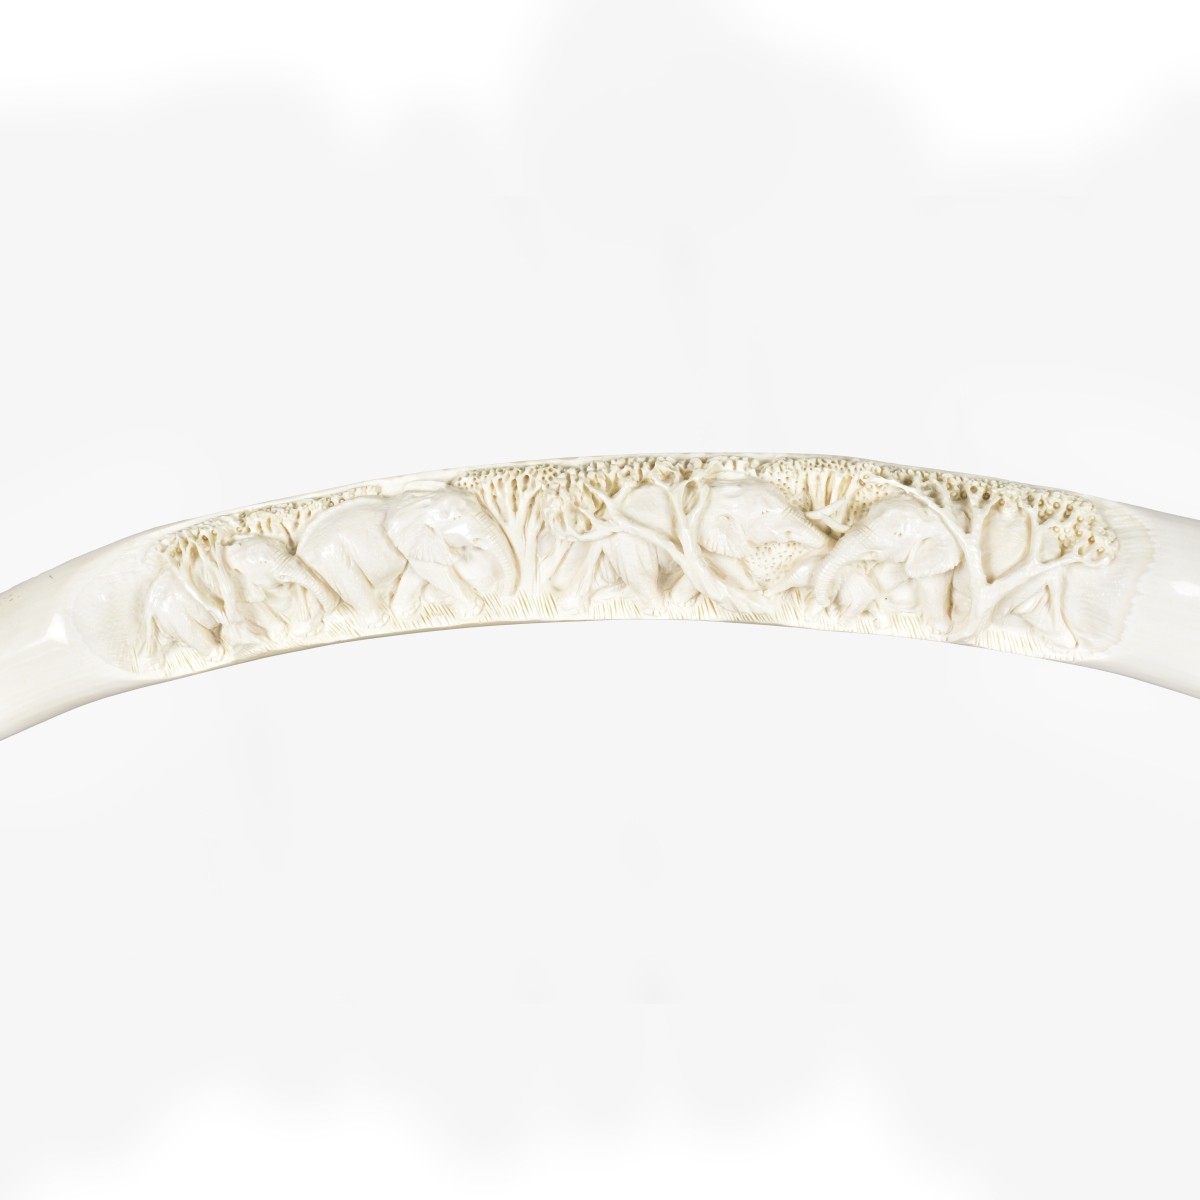 Large African Deep Relief Tusk